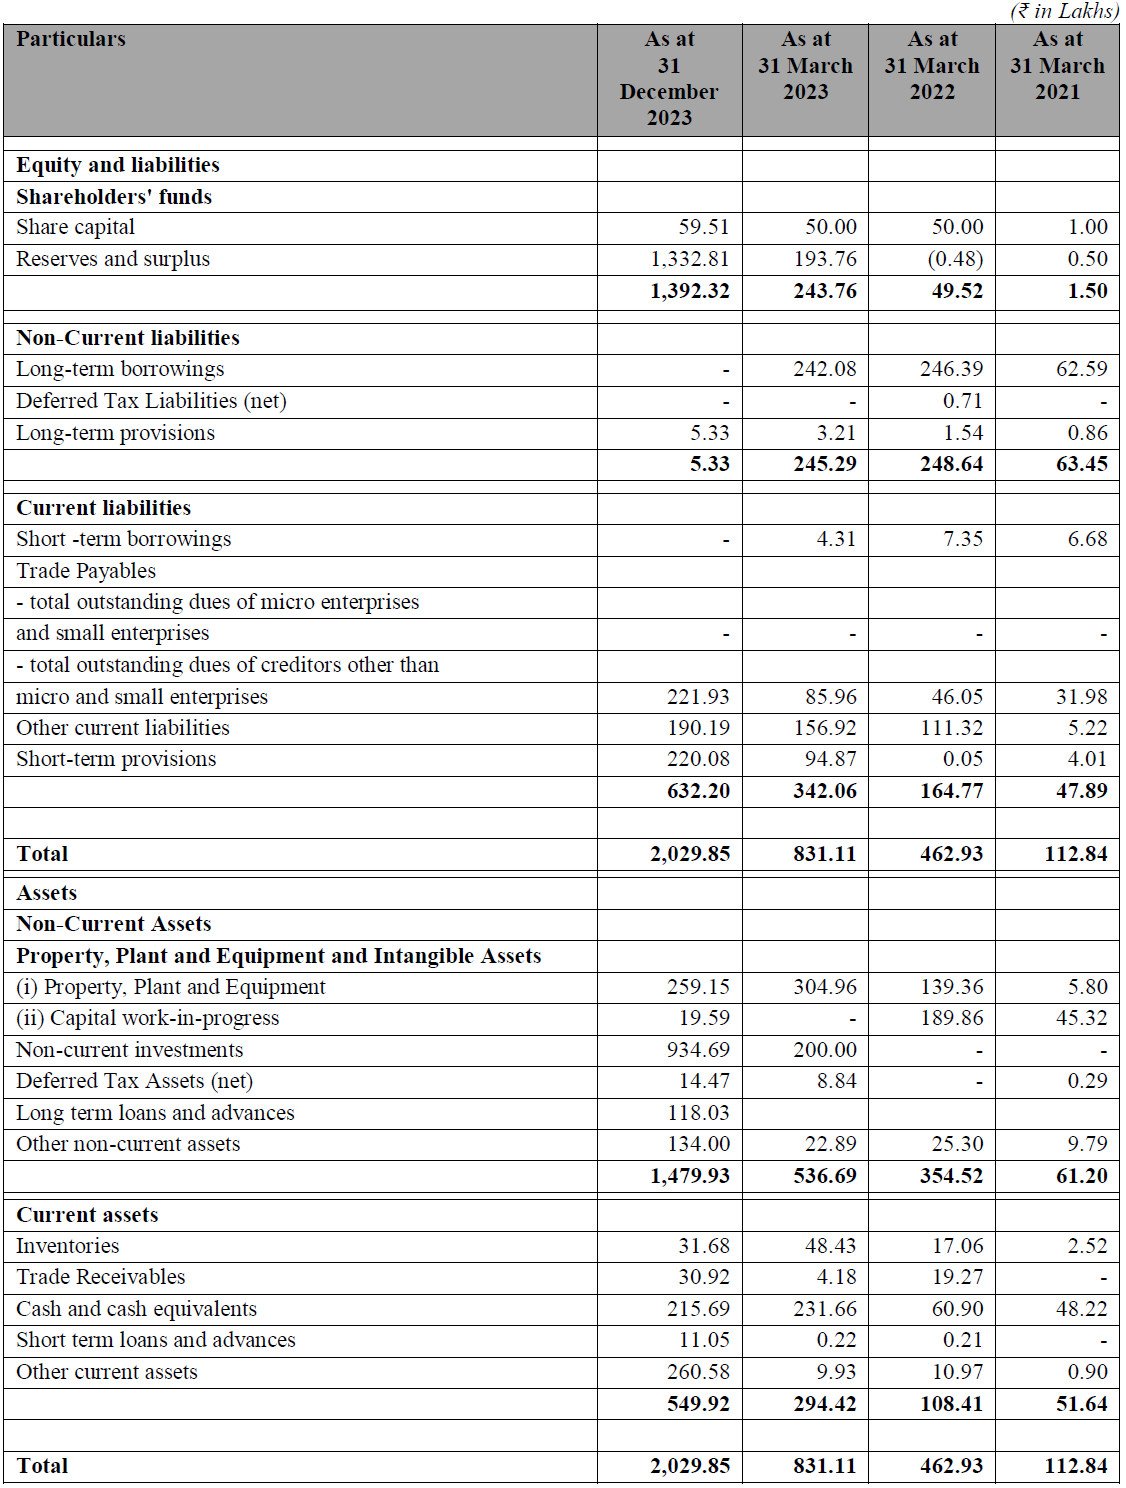 Assets and Liabilities of Nephro care India IPO